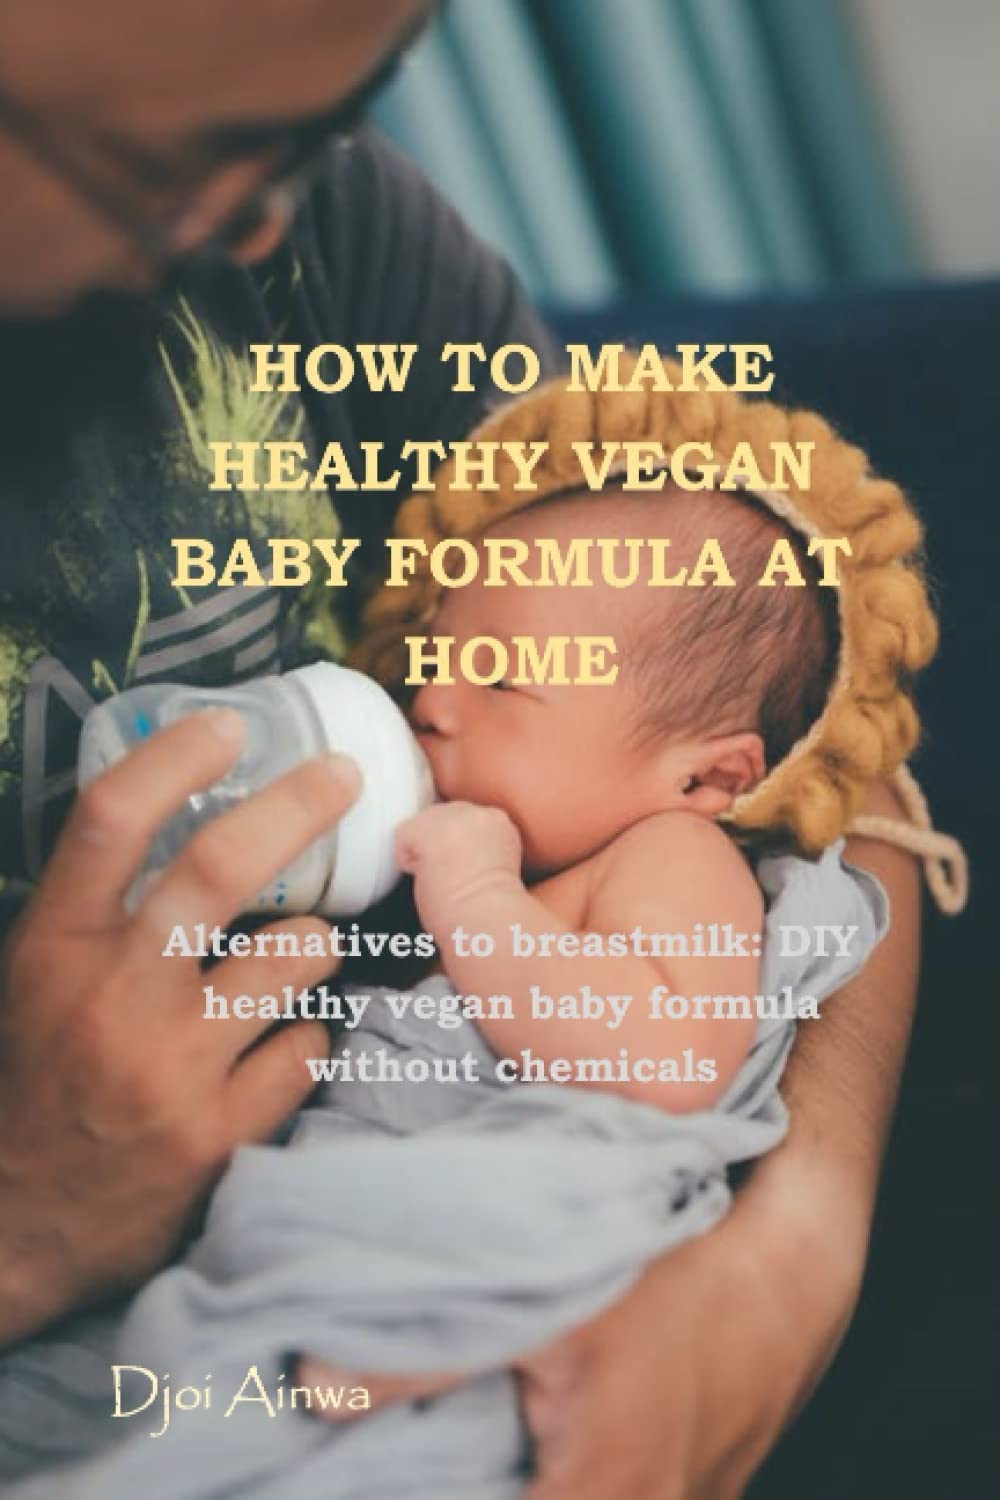 HOW TO MAKE HEALTHY VEGAN BABY FORMULA AT HOME: Alternatives to Breast milk, and Secret DIY healthy baby formula recipe without chemical. Prepare hypoallergenic and fortified formula for your infant